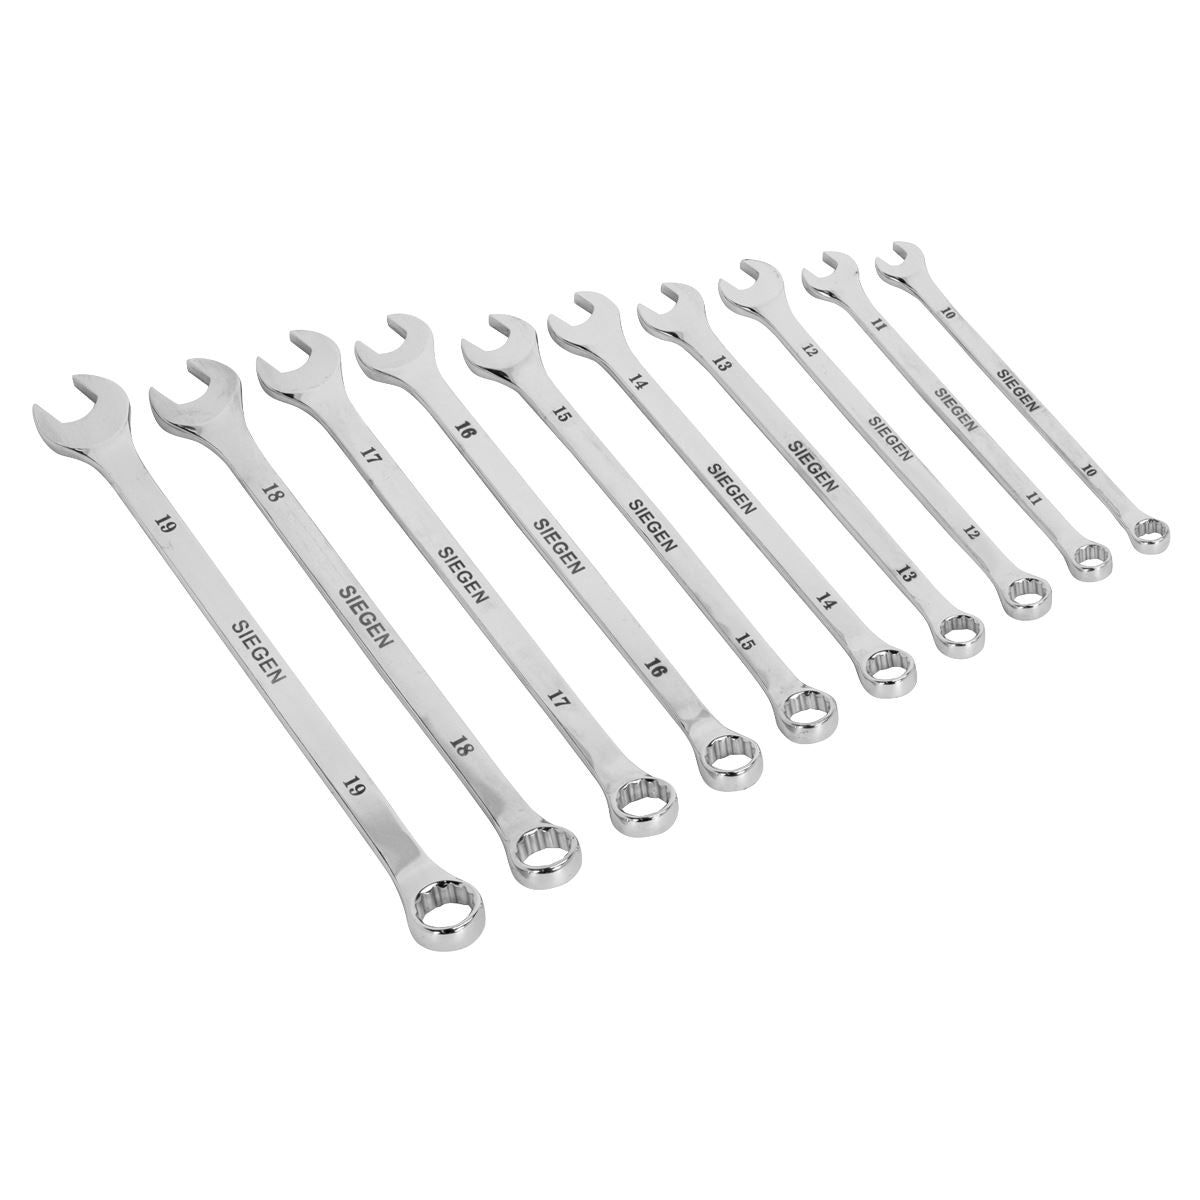 Siegen by Sealey Combination Spanner Set 10pc Extra-Long Metric